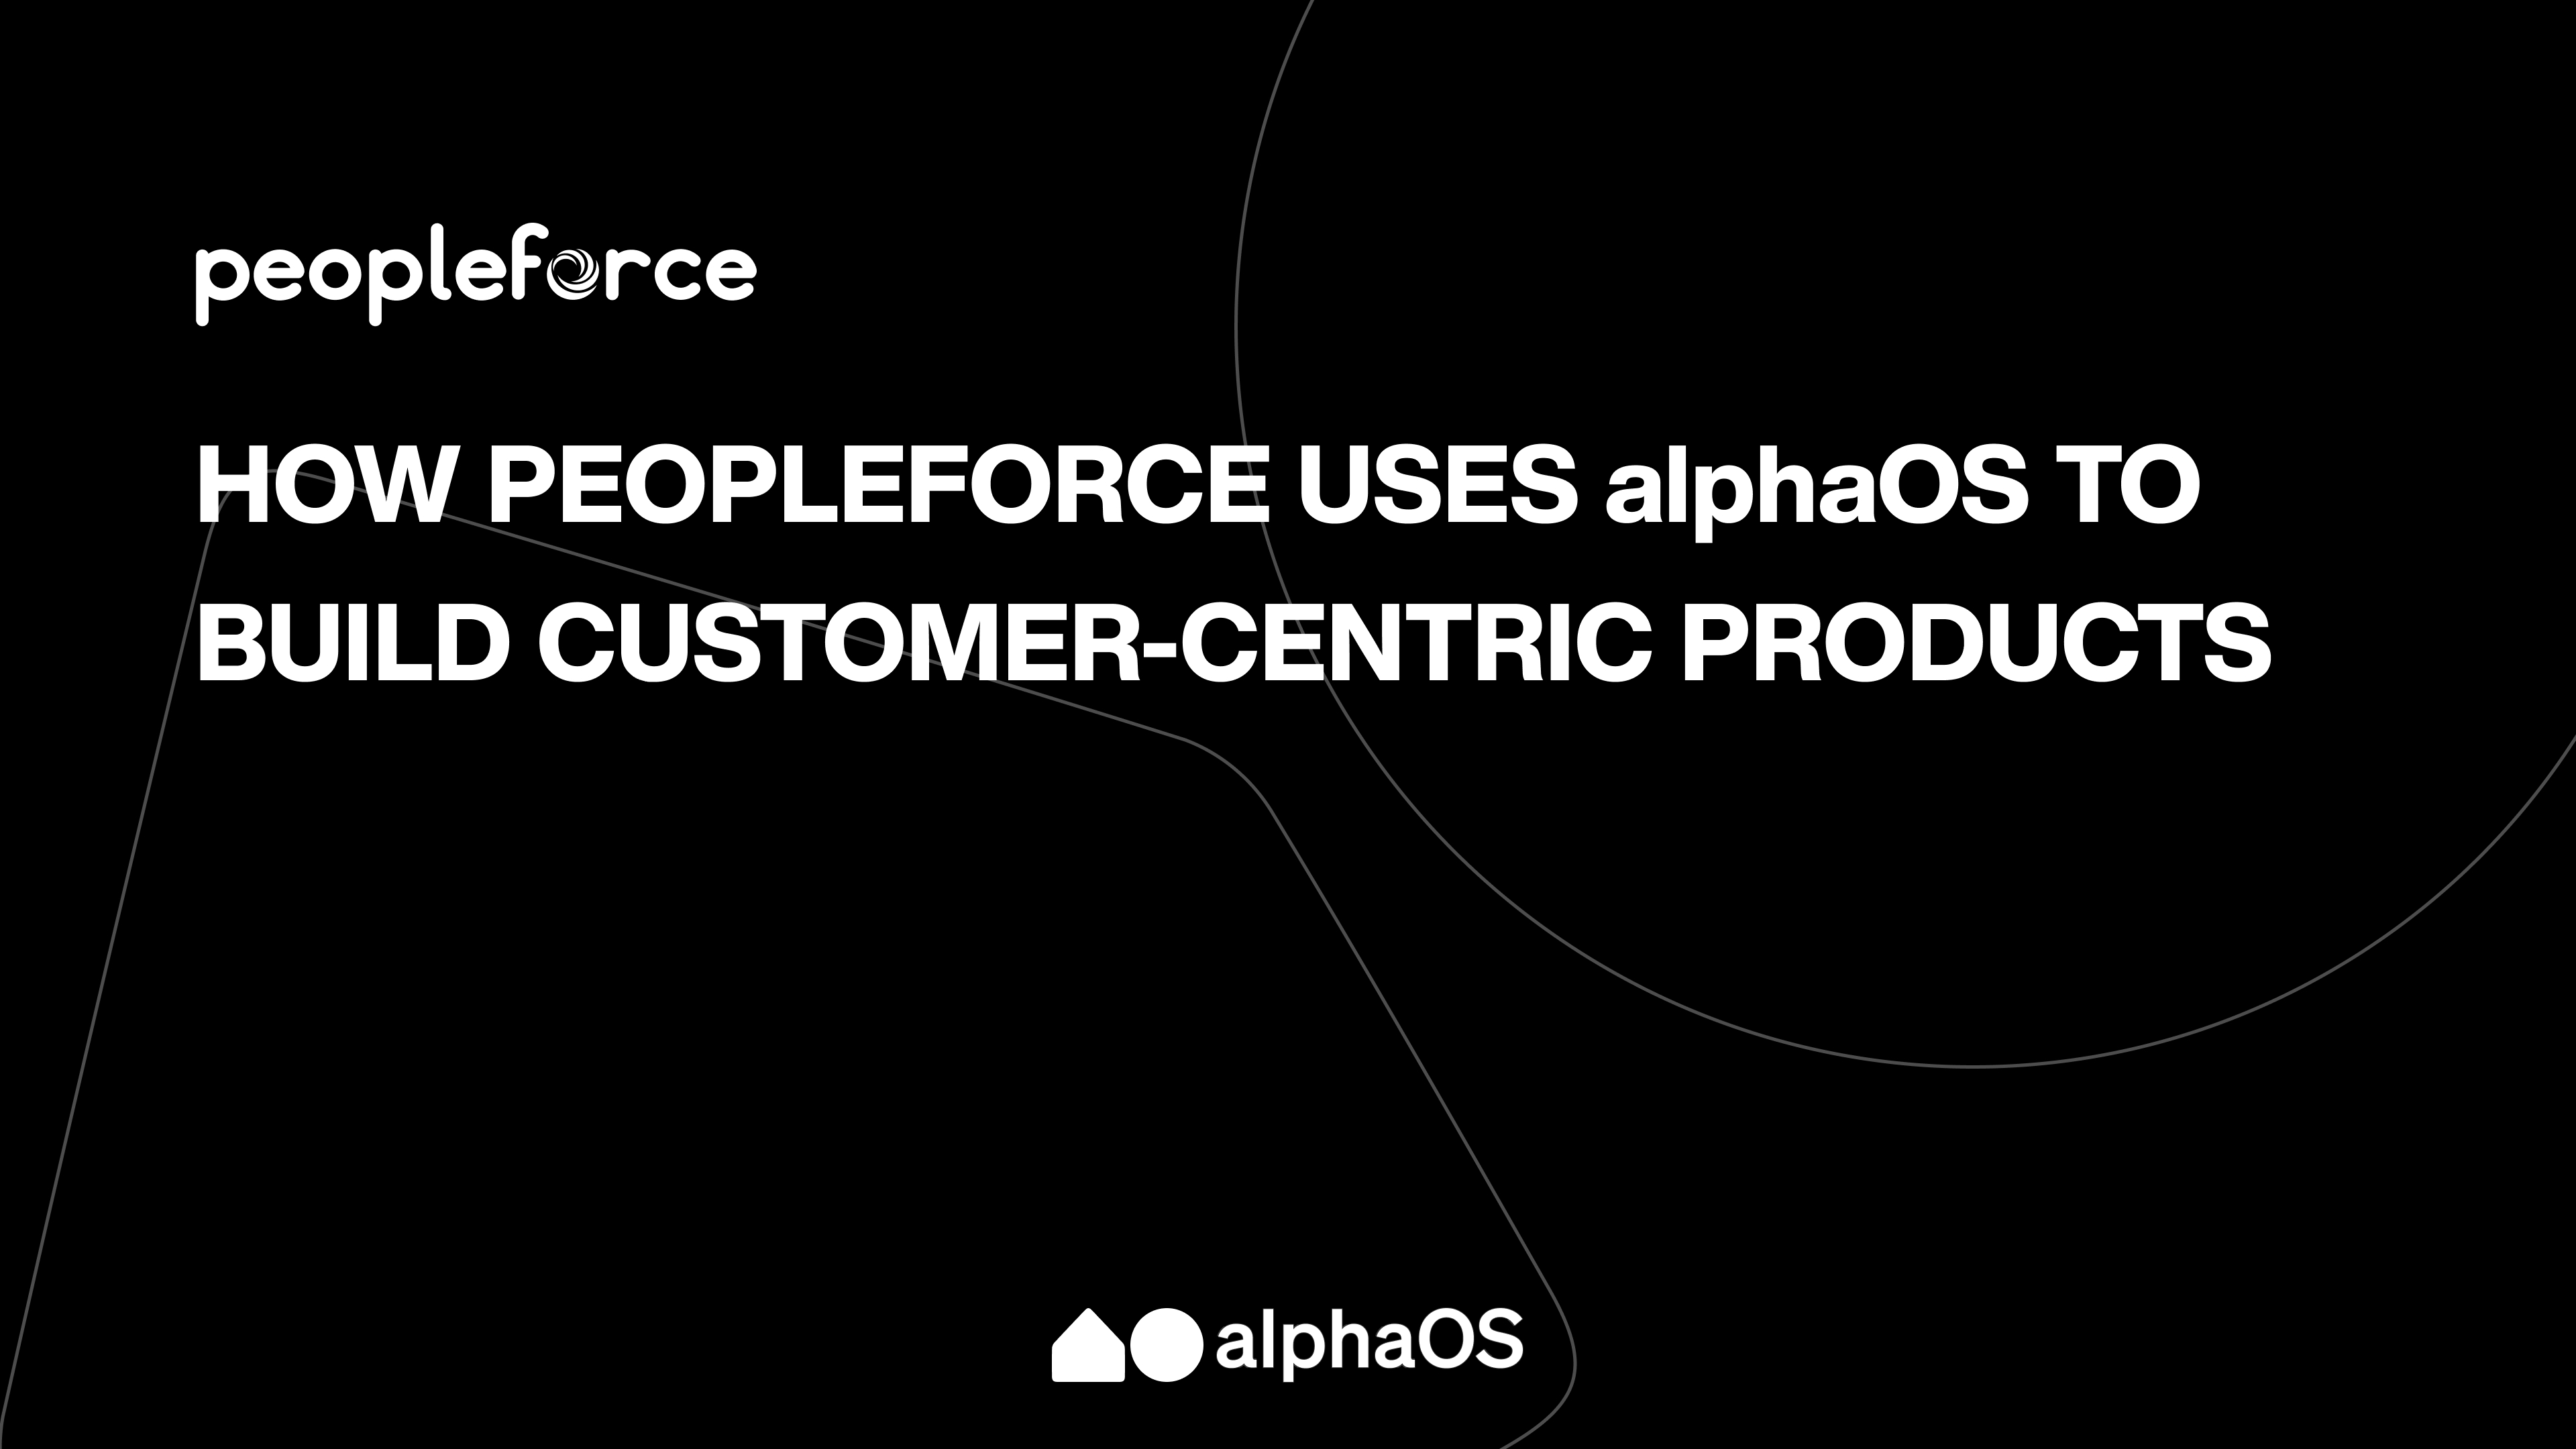 How Peopleforce uses alphaOS to build customer-centric products